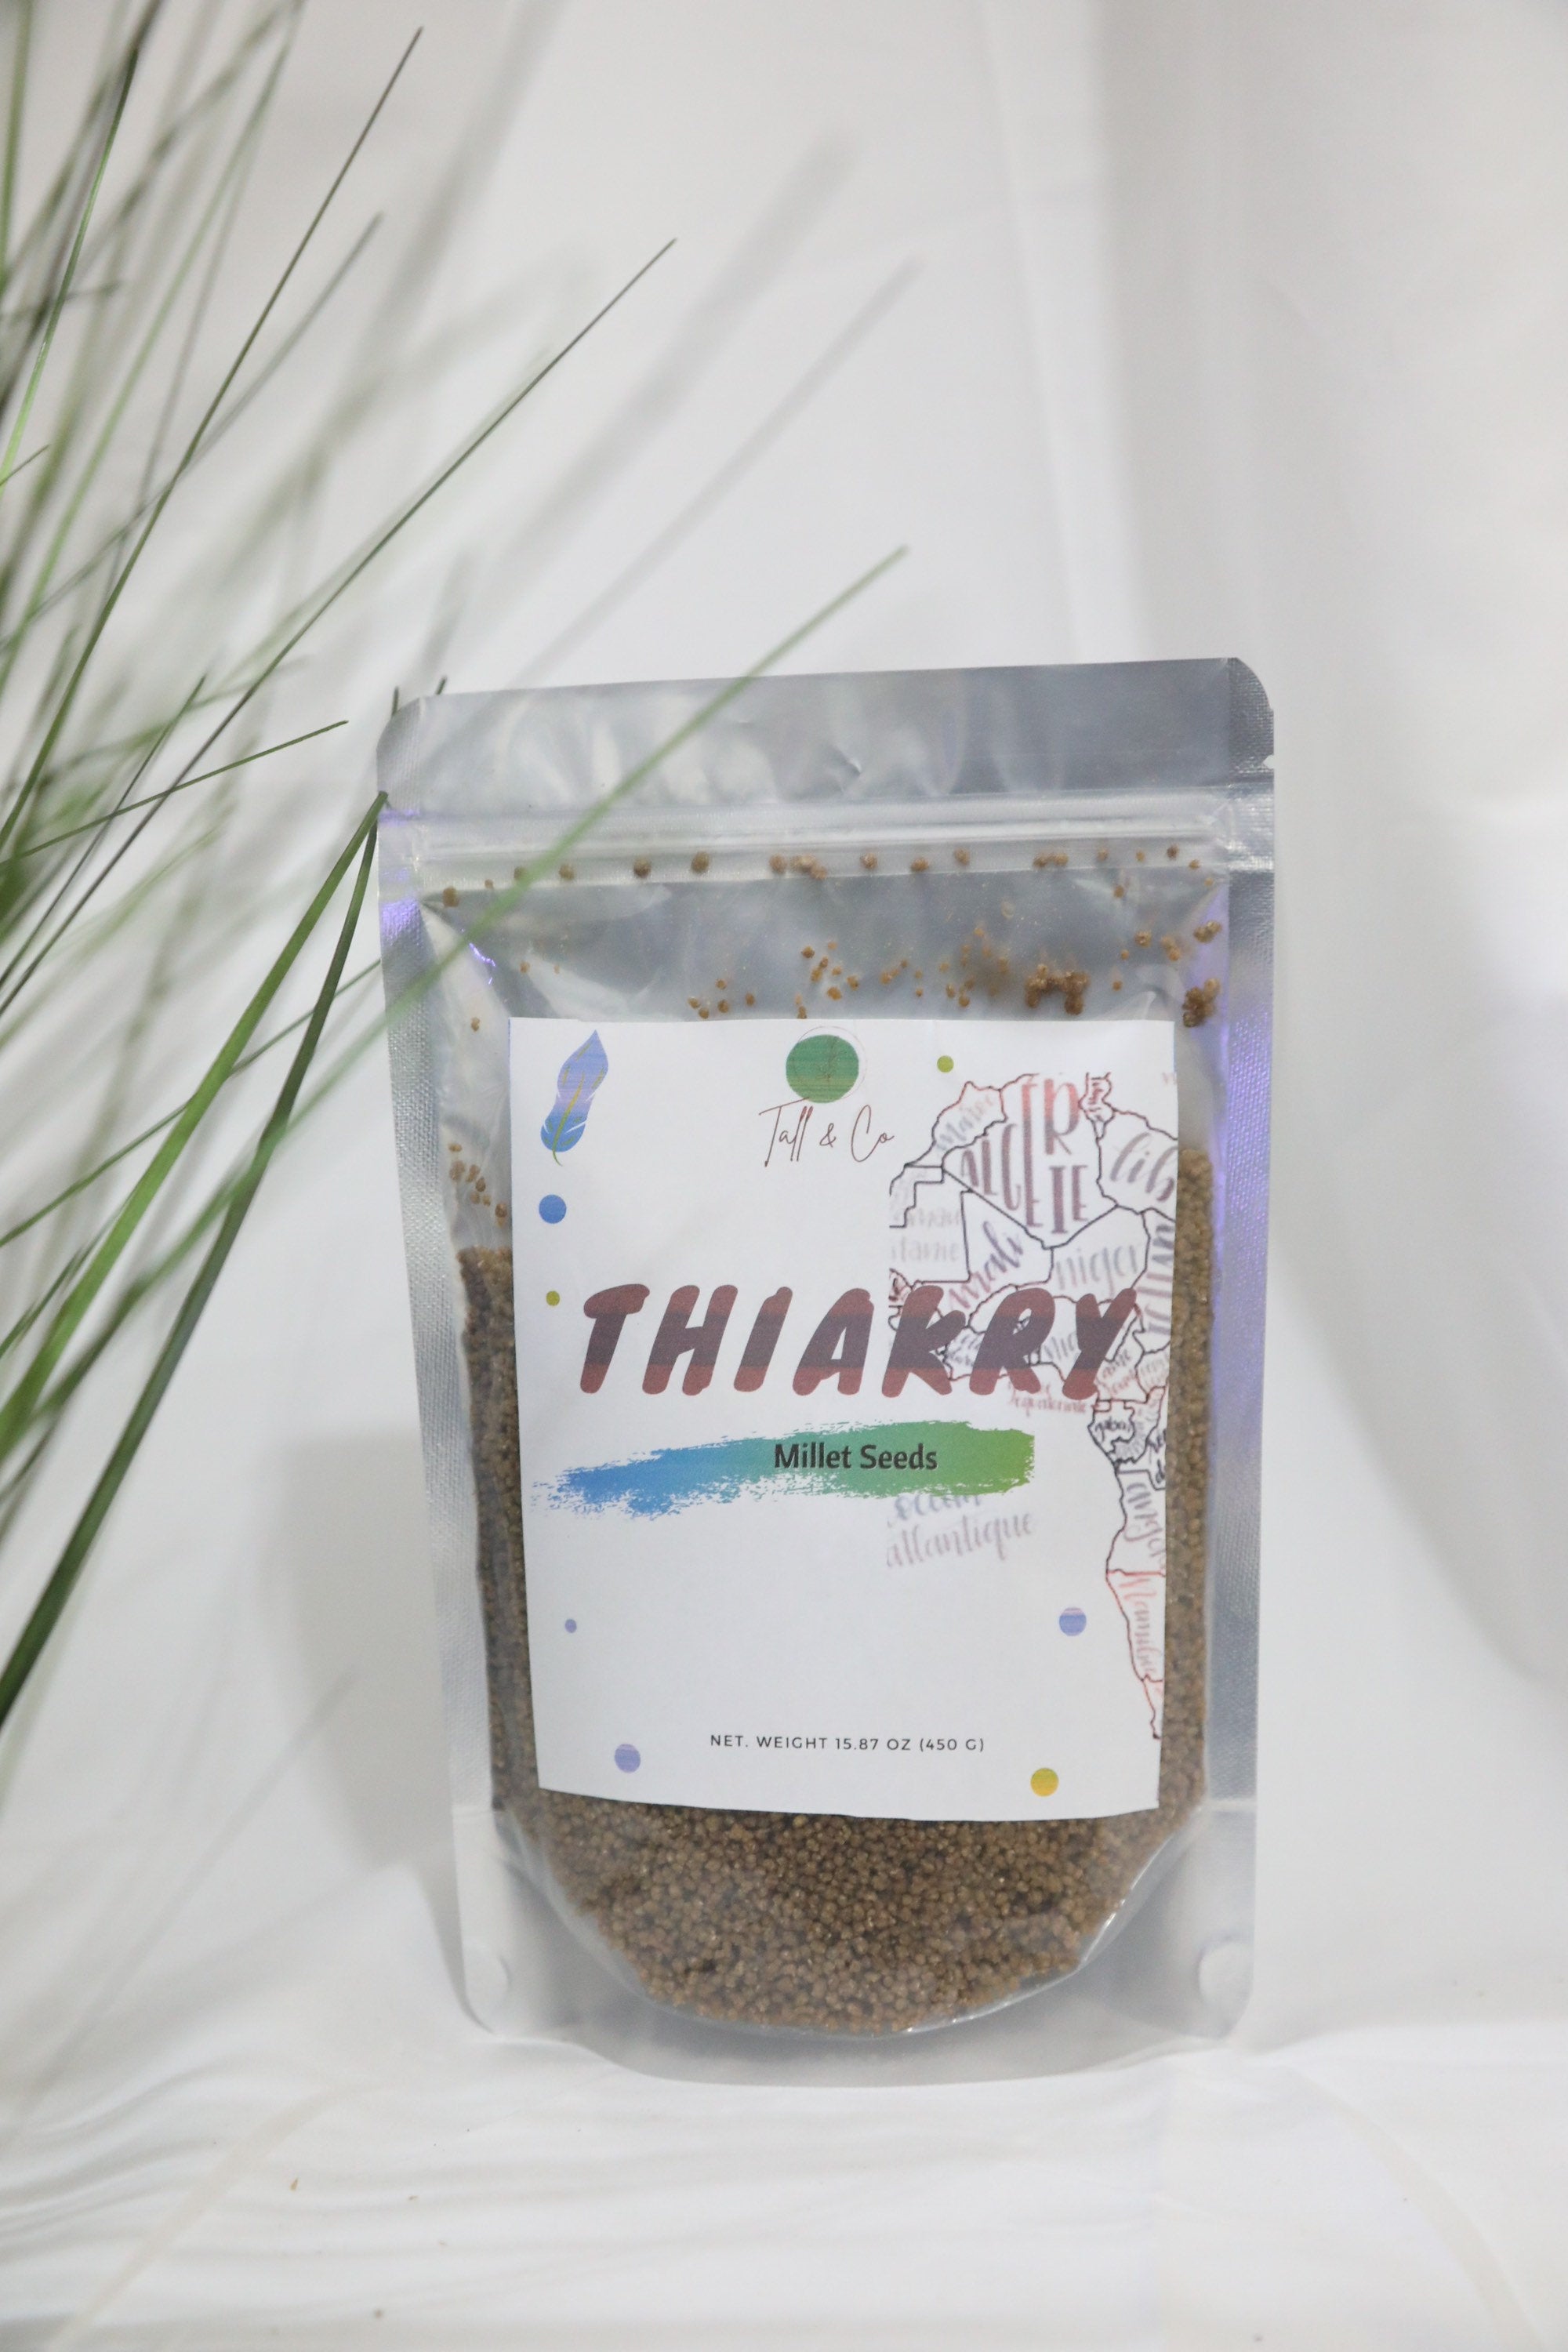 Thiacry / millet Seeds 450g